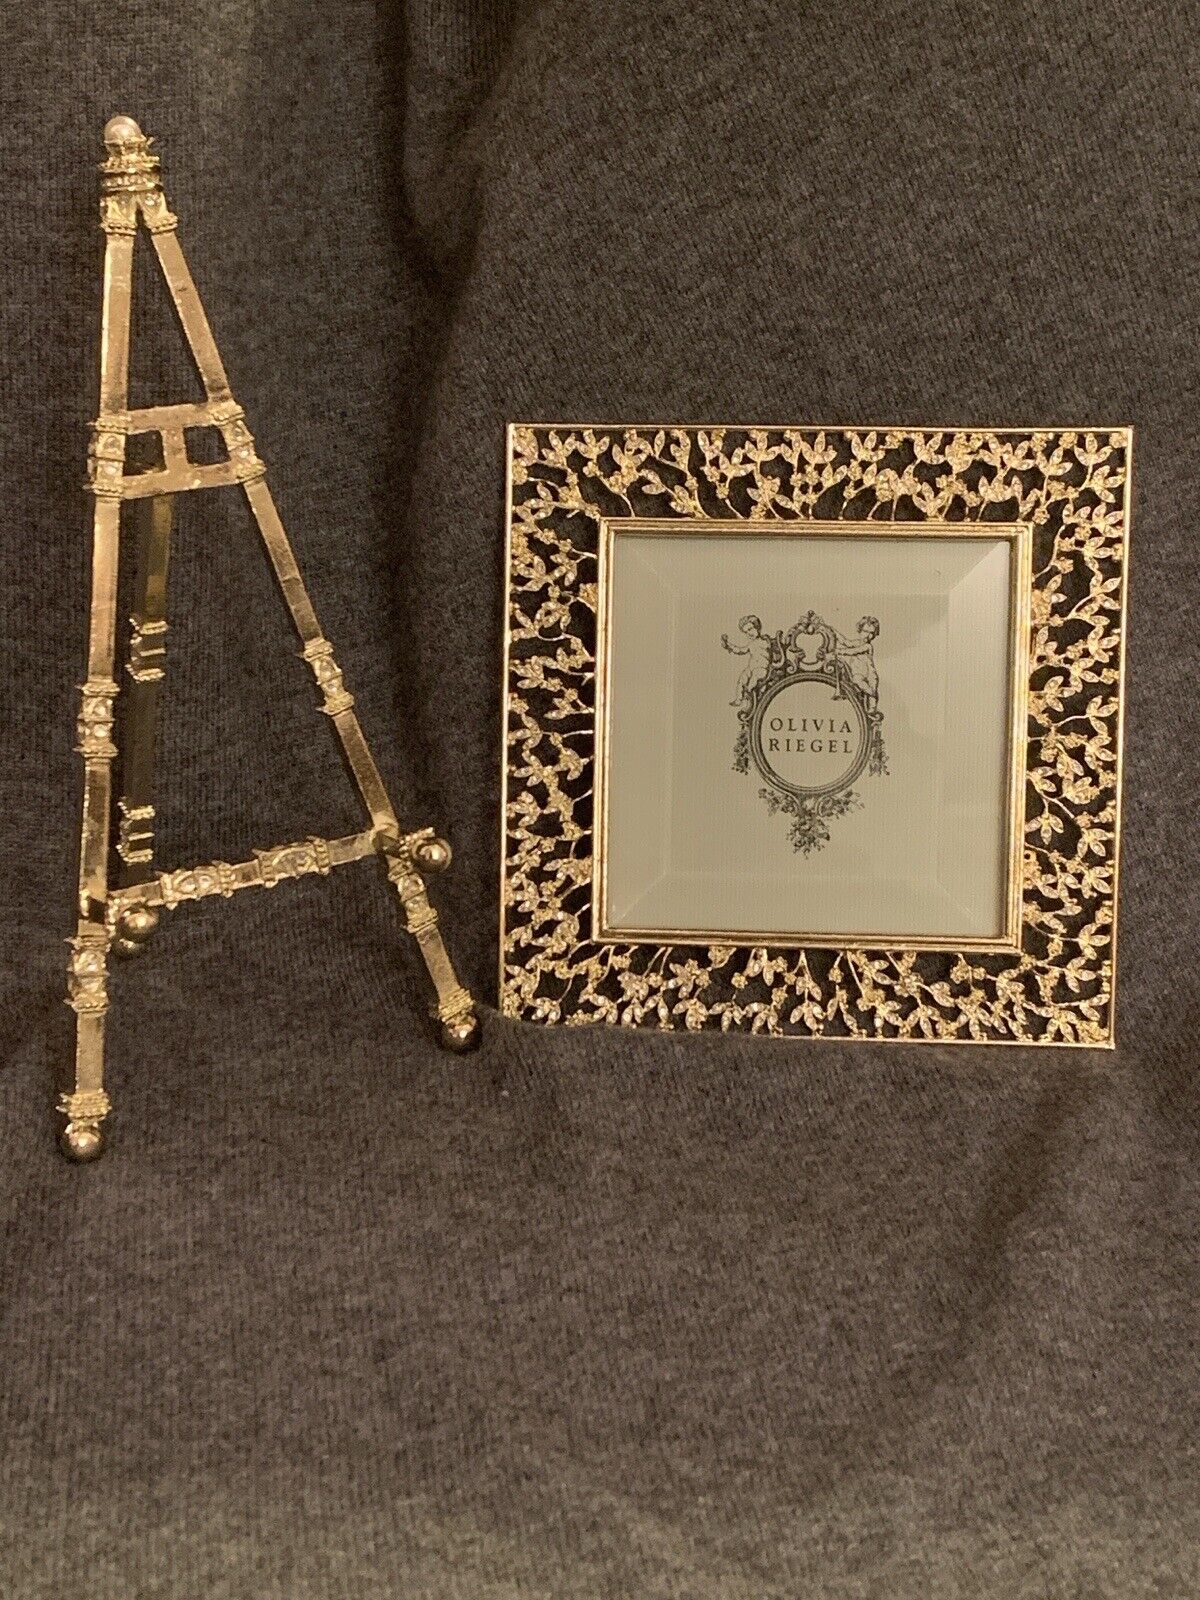 Olivia Riegel Austrian Crystals, Isadora 4” x 4” Gold/Pewter Frame W/ Easel, Box